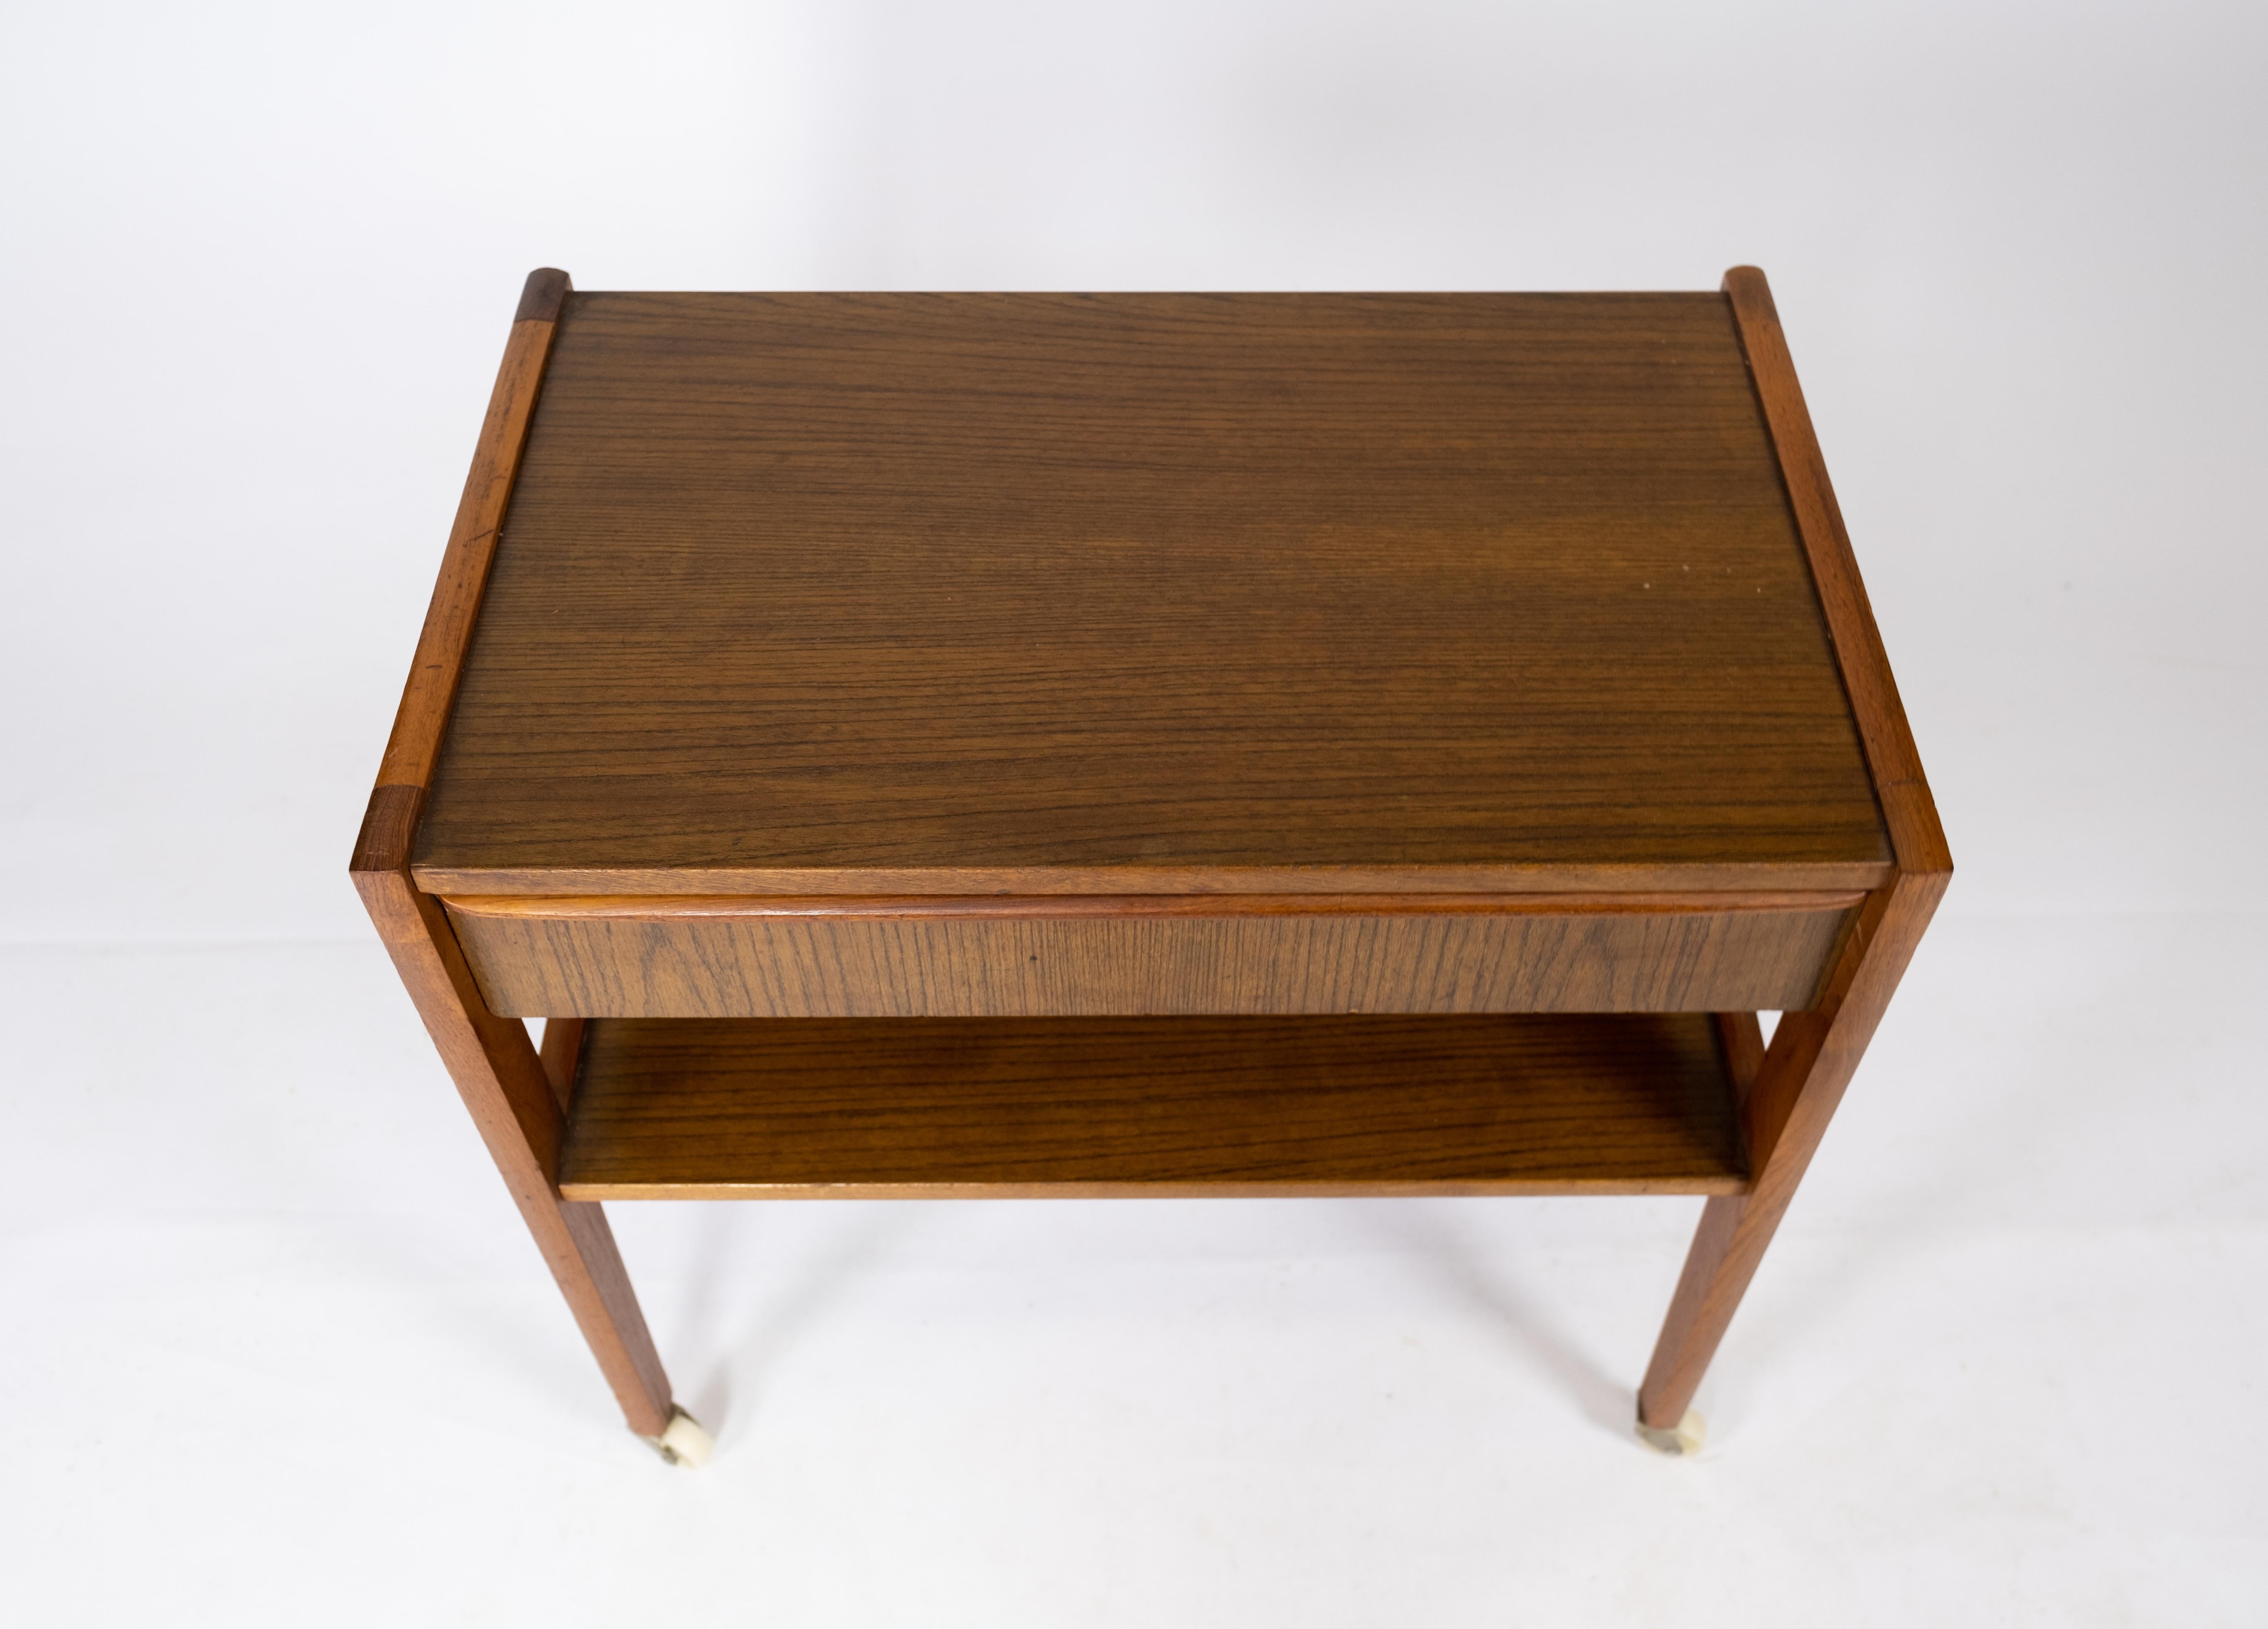 Mid-20th Century Scandinavian Modern Small Side Table with Drawer in Teak from the 1960s For Sale